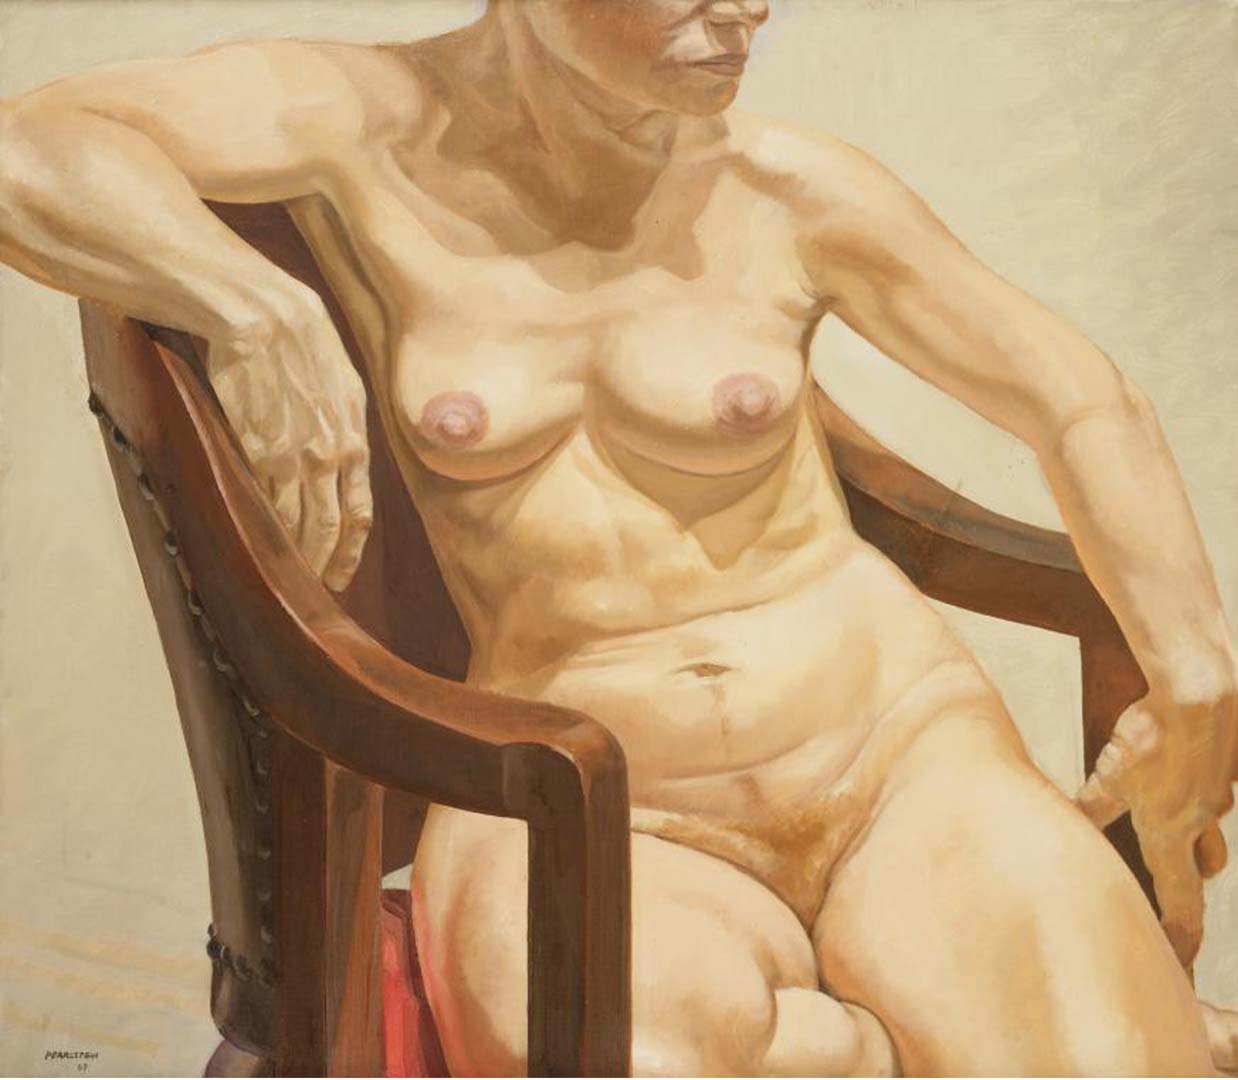 1967 Model Seated on Chair Oil on Canvas 26 x 30